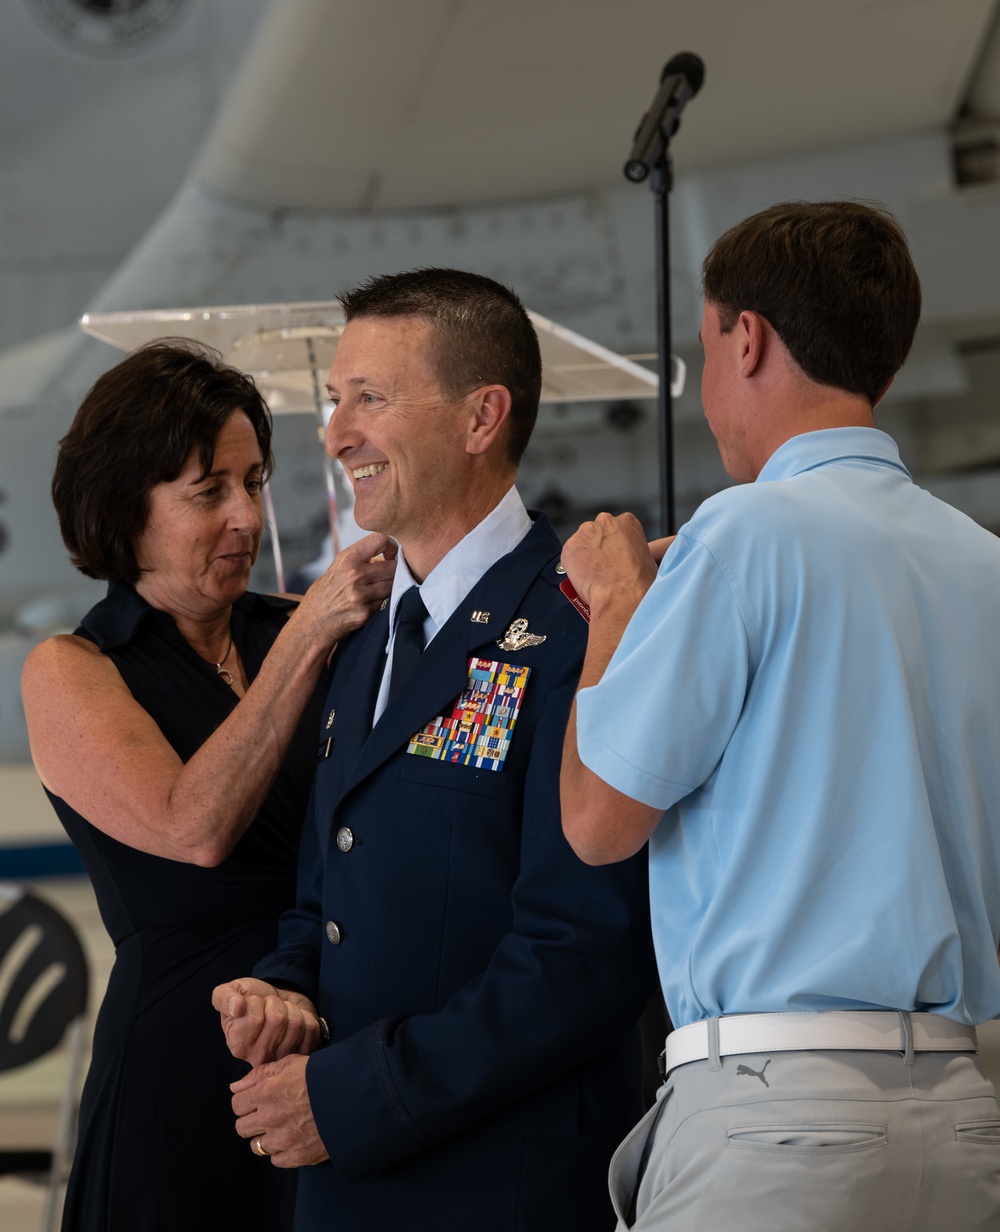 122nd Fighter Wing Promotion Ceremony and Change of Command Ceremony